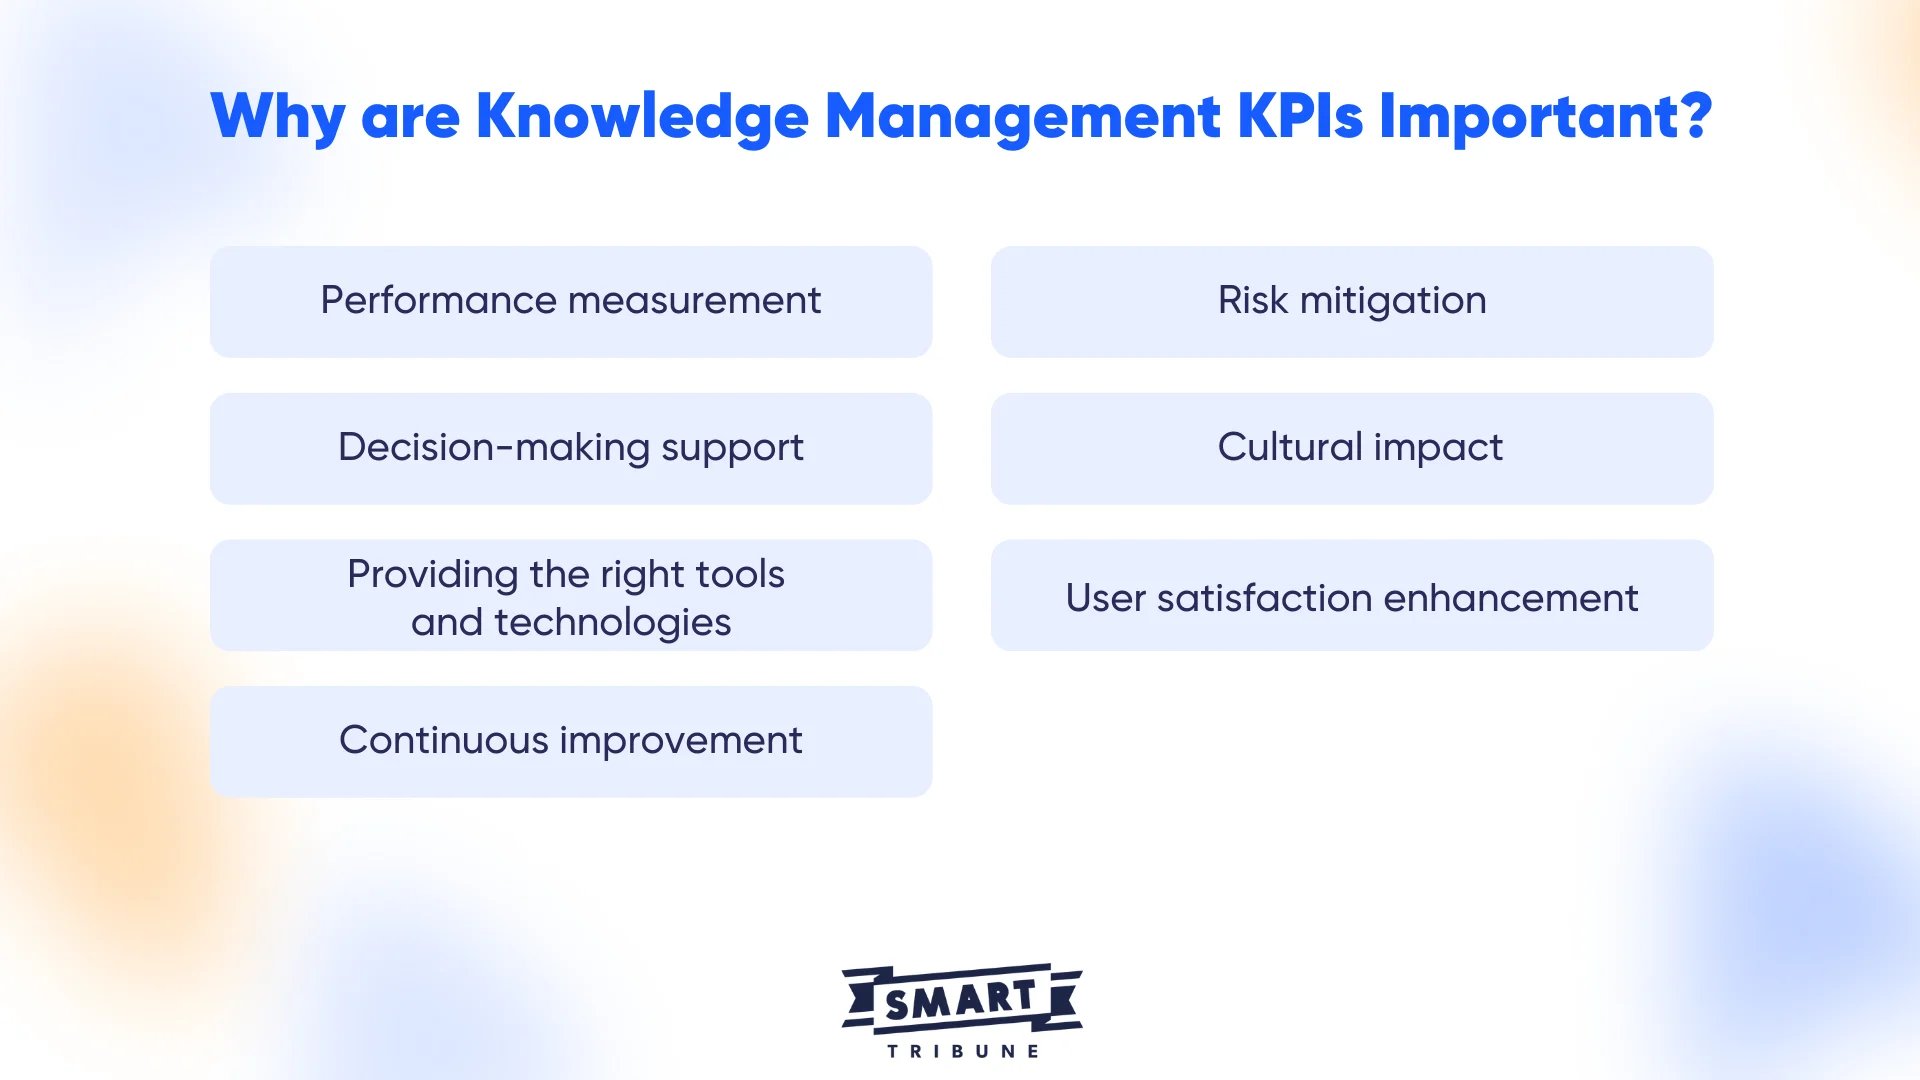 Why are Knowledge Management KPIs Important